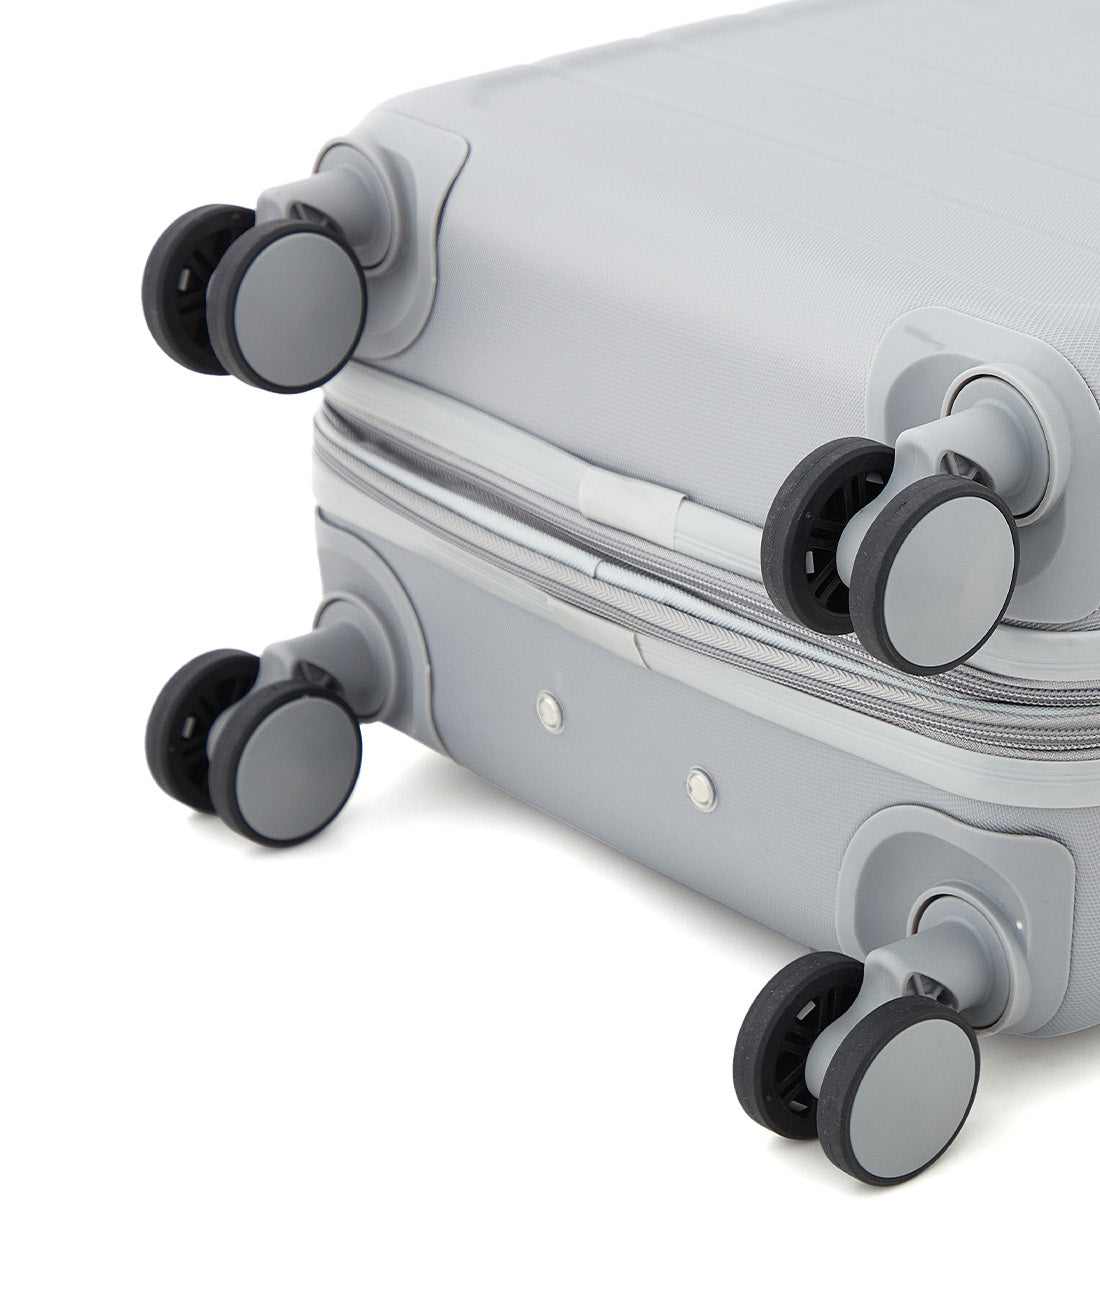 French Connection | Saint-Martin Collection | 2PC Wing-On Luggage Set